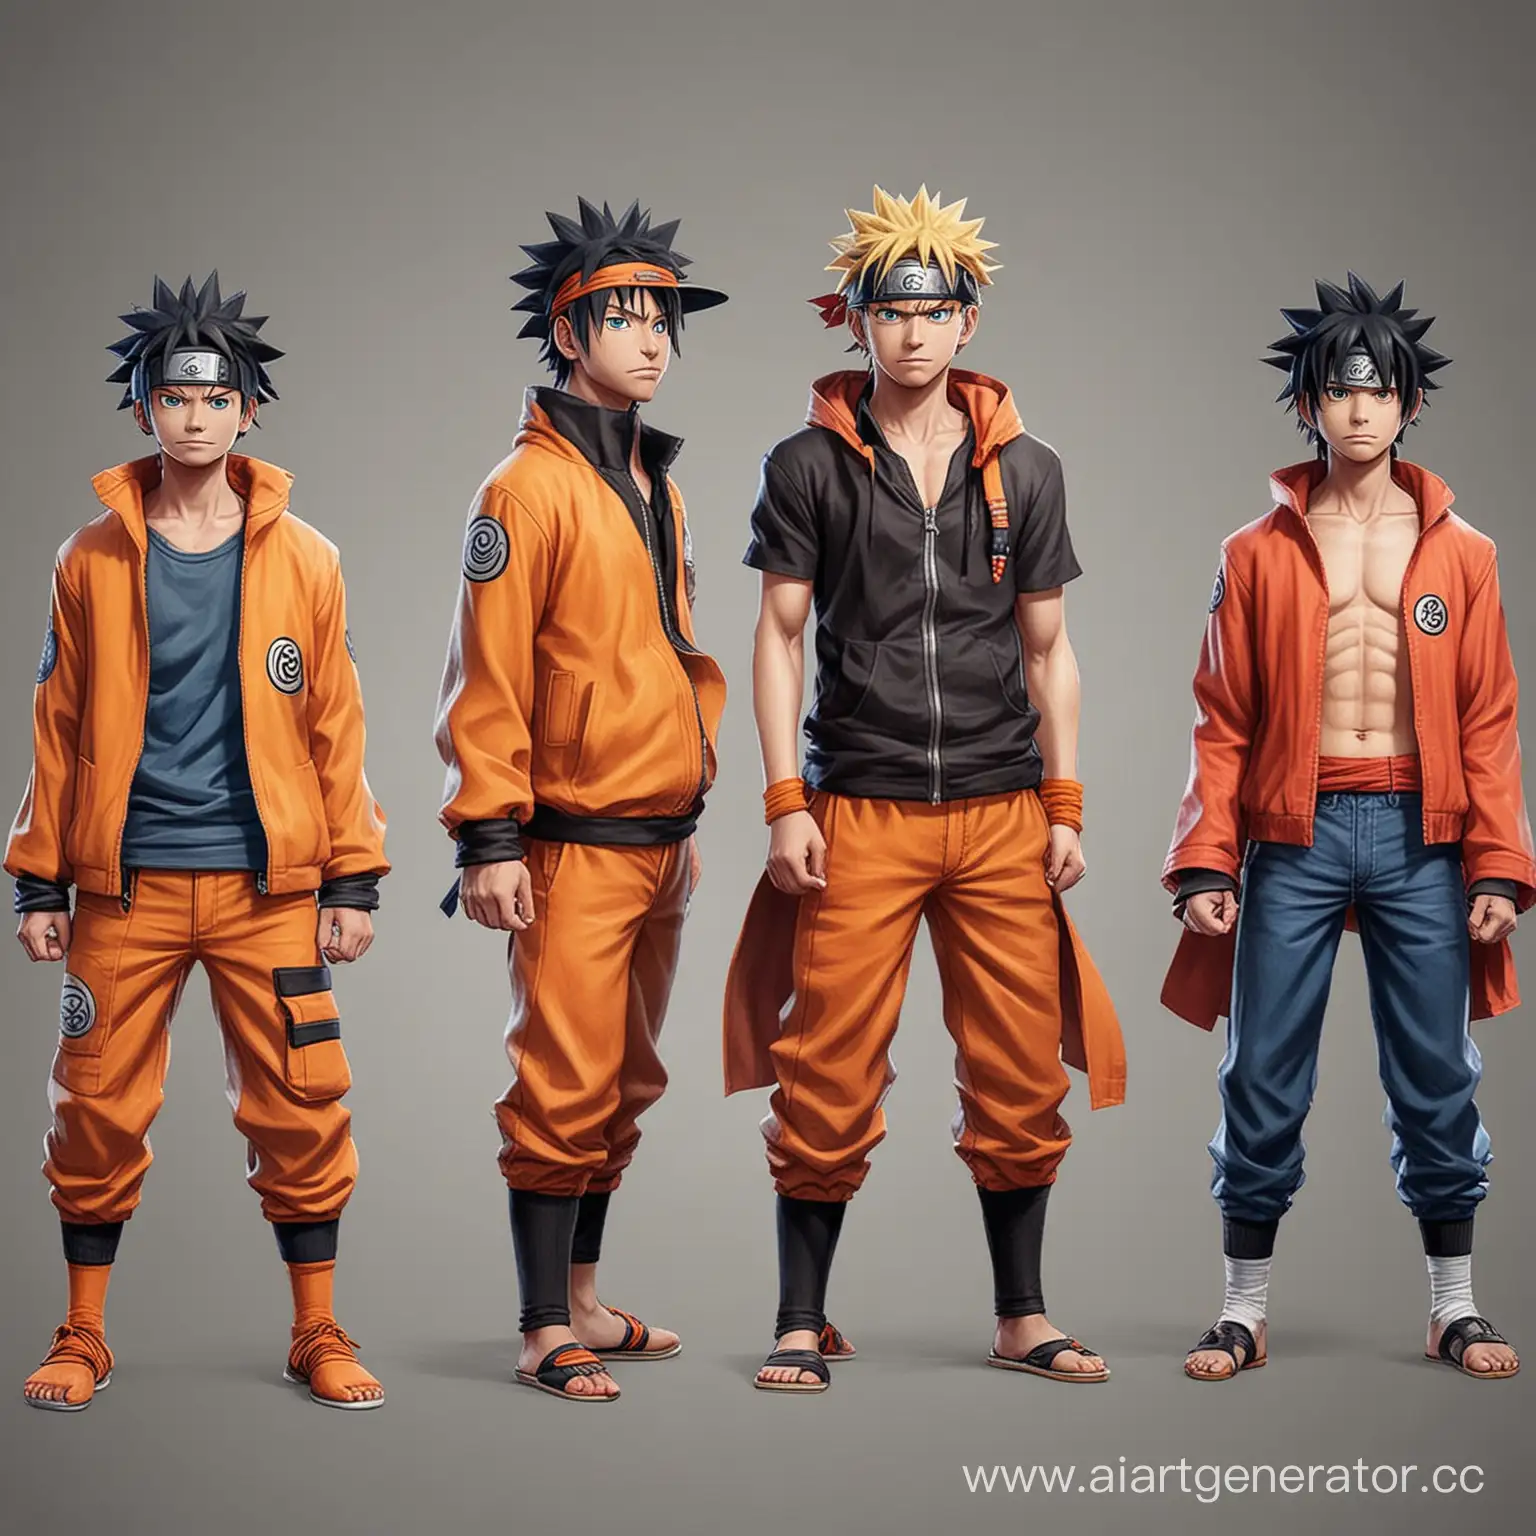 Naruto-Wearing-Gokus-Attire-and-Luffys-Hat-Fusion-of-Iconic-Anime-Styles